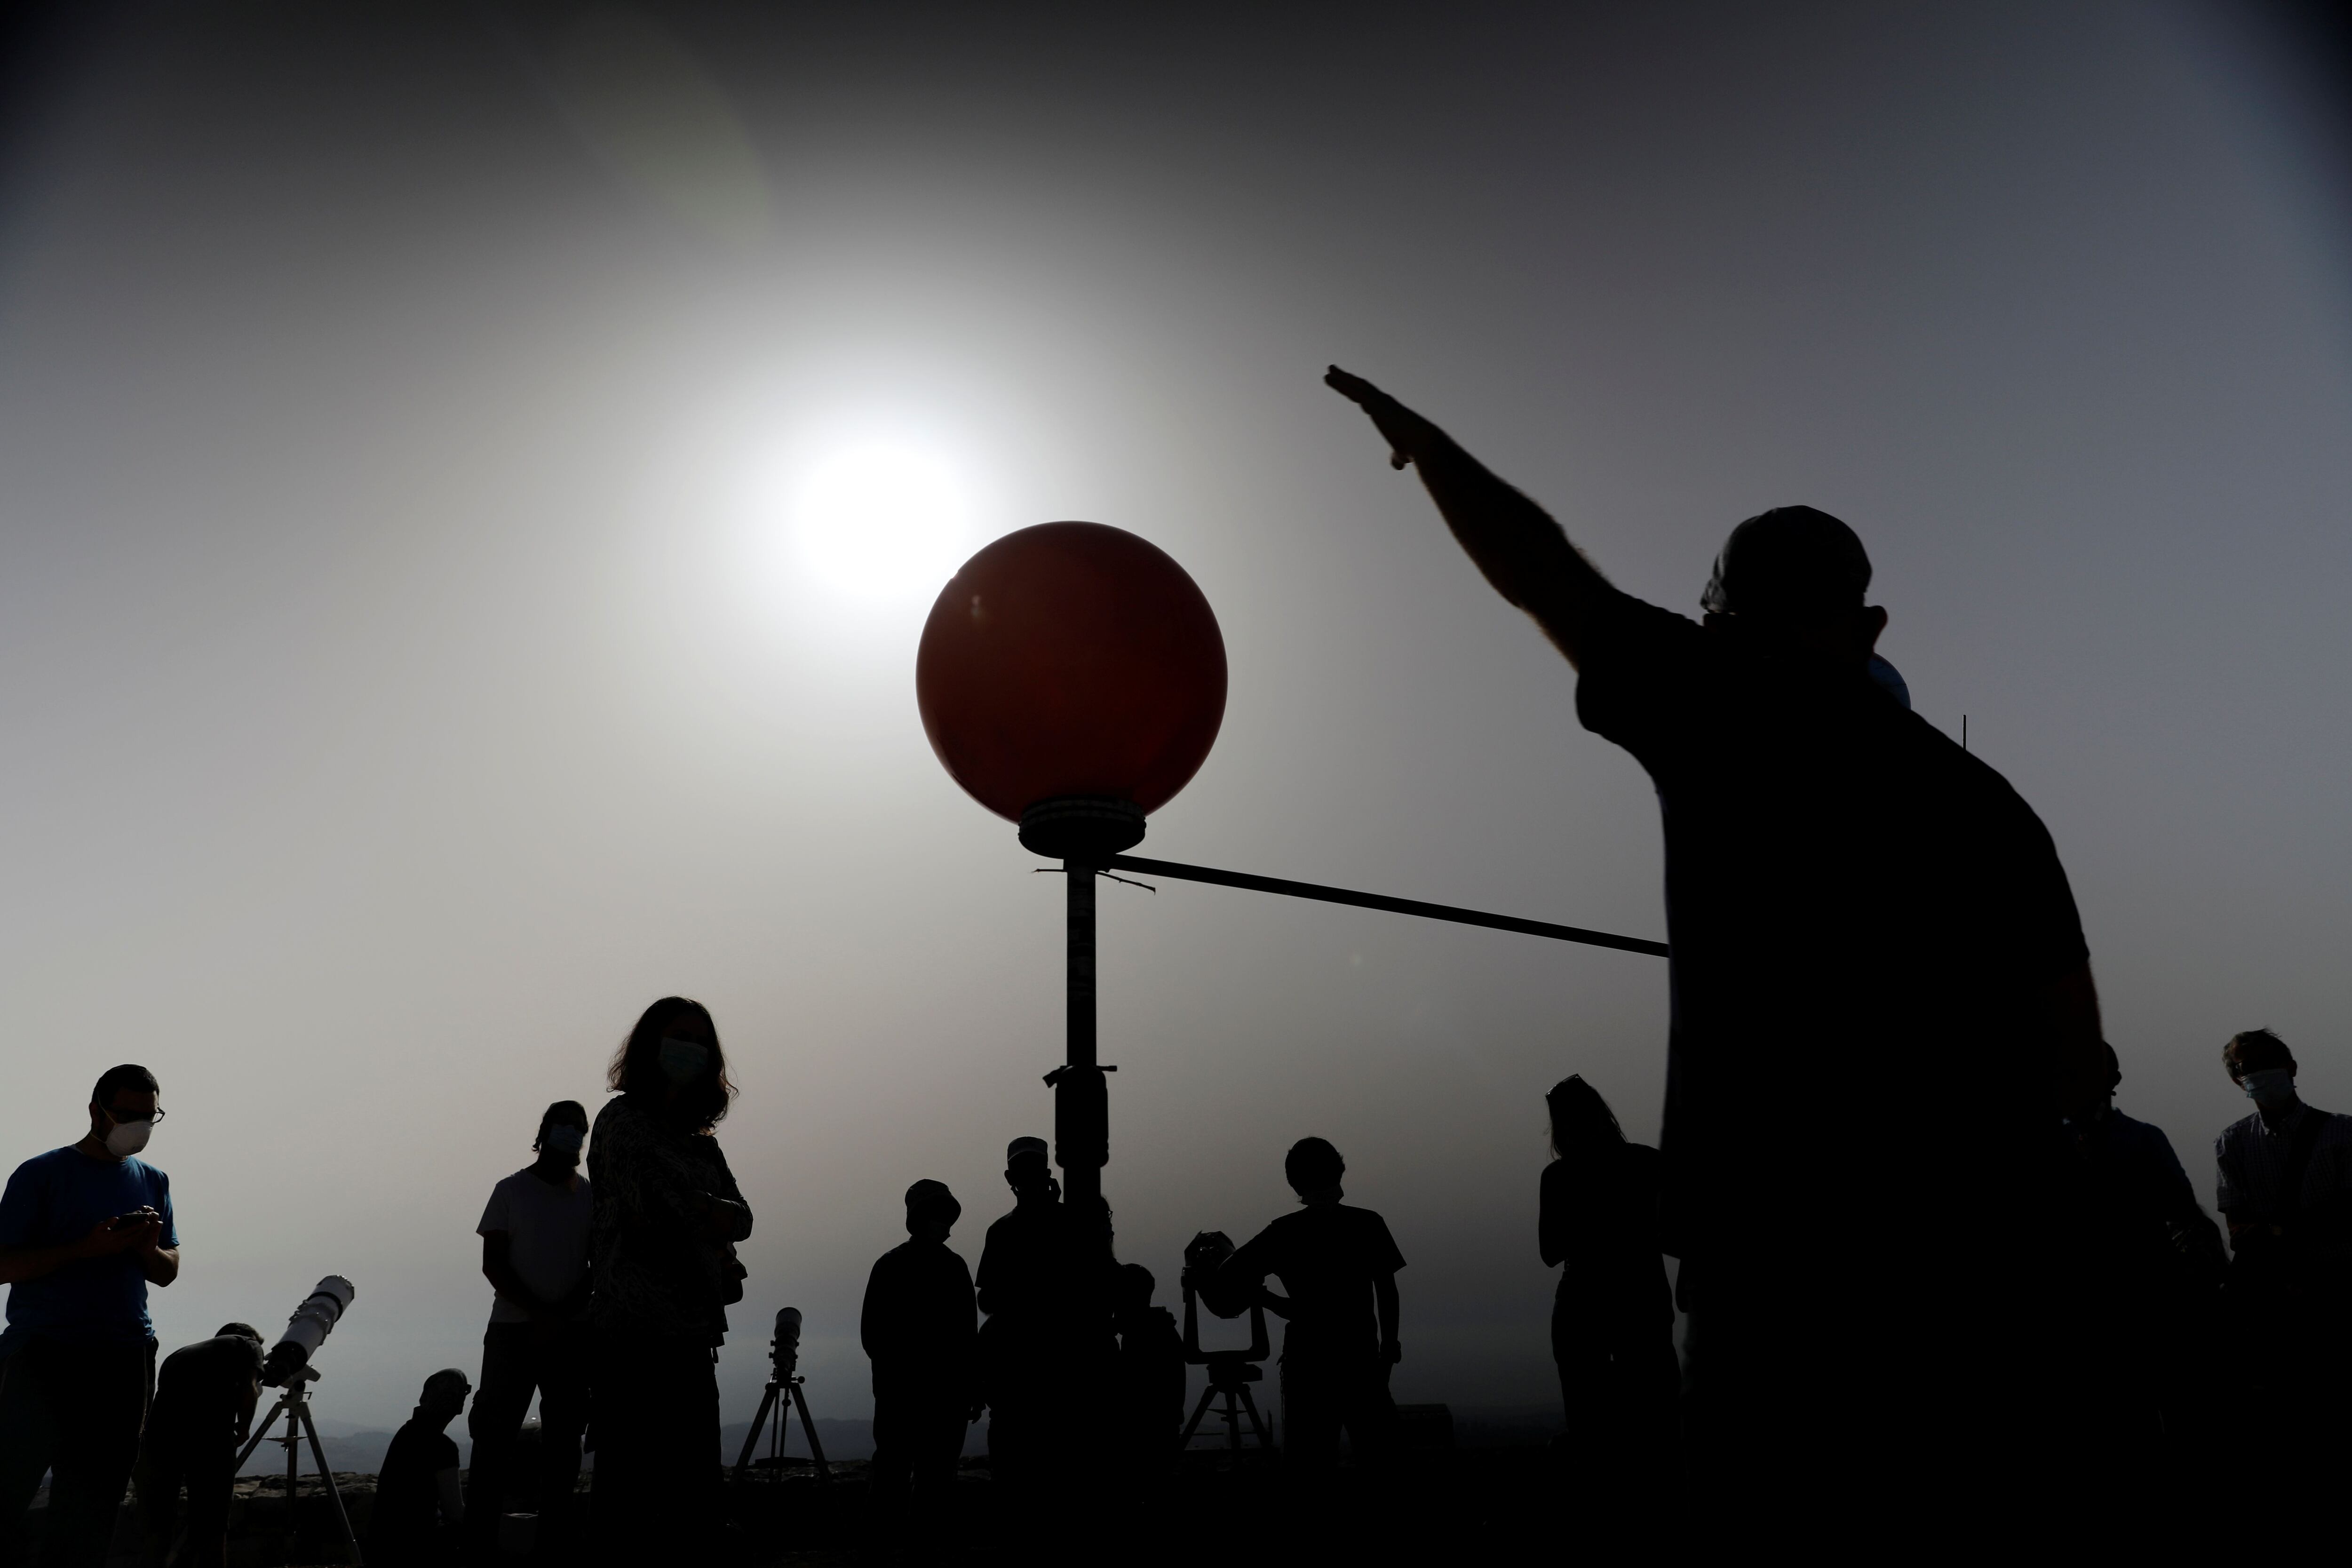 People stand next to a model of the earth, the moon and the sun as a partial solar eclipse is seen from Mount Scopus in Jerusalem June 21, 2020. REUTERS/Ronen Zvulun